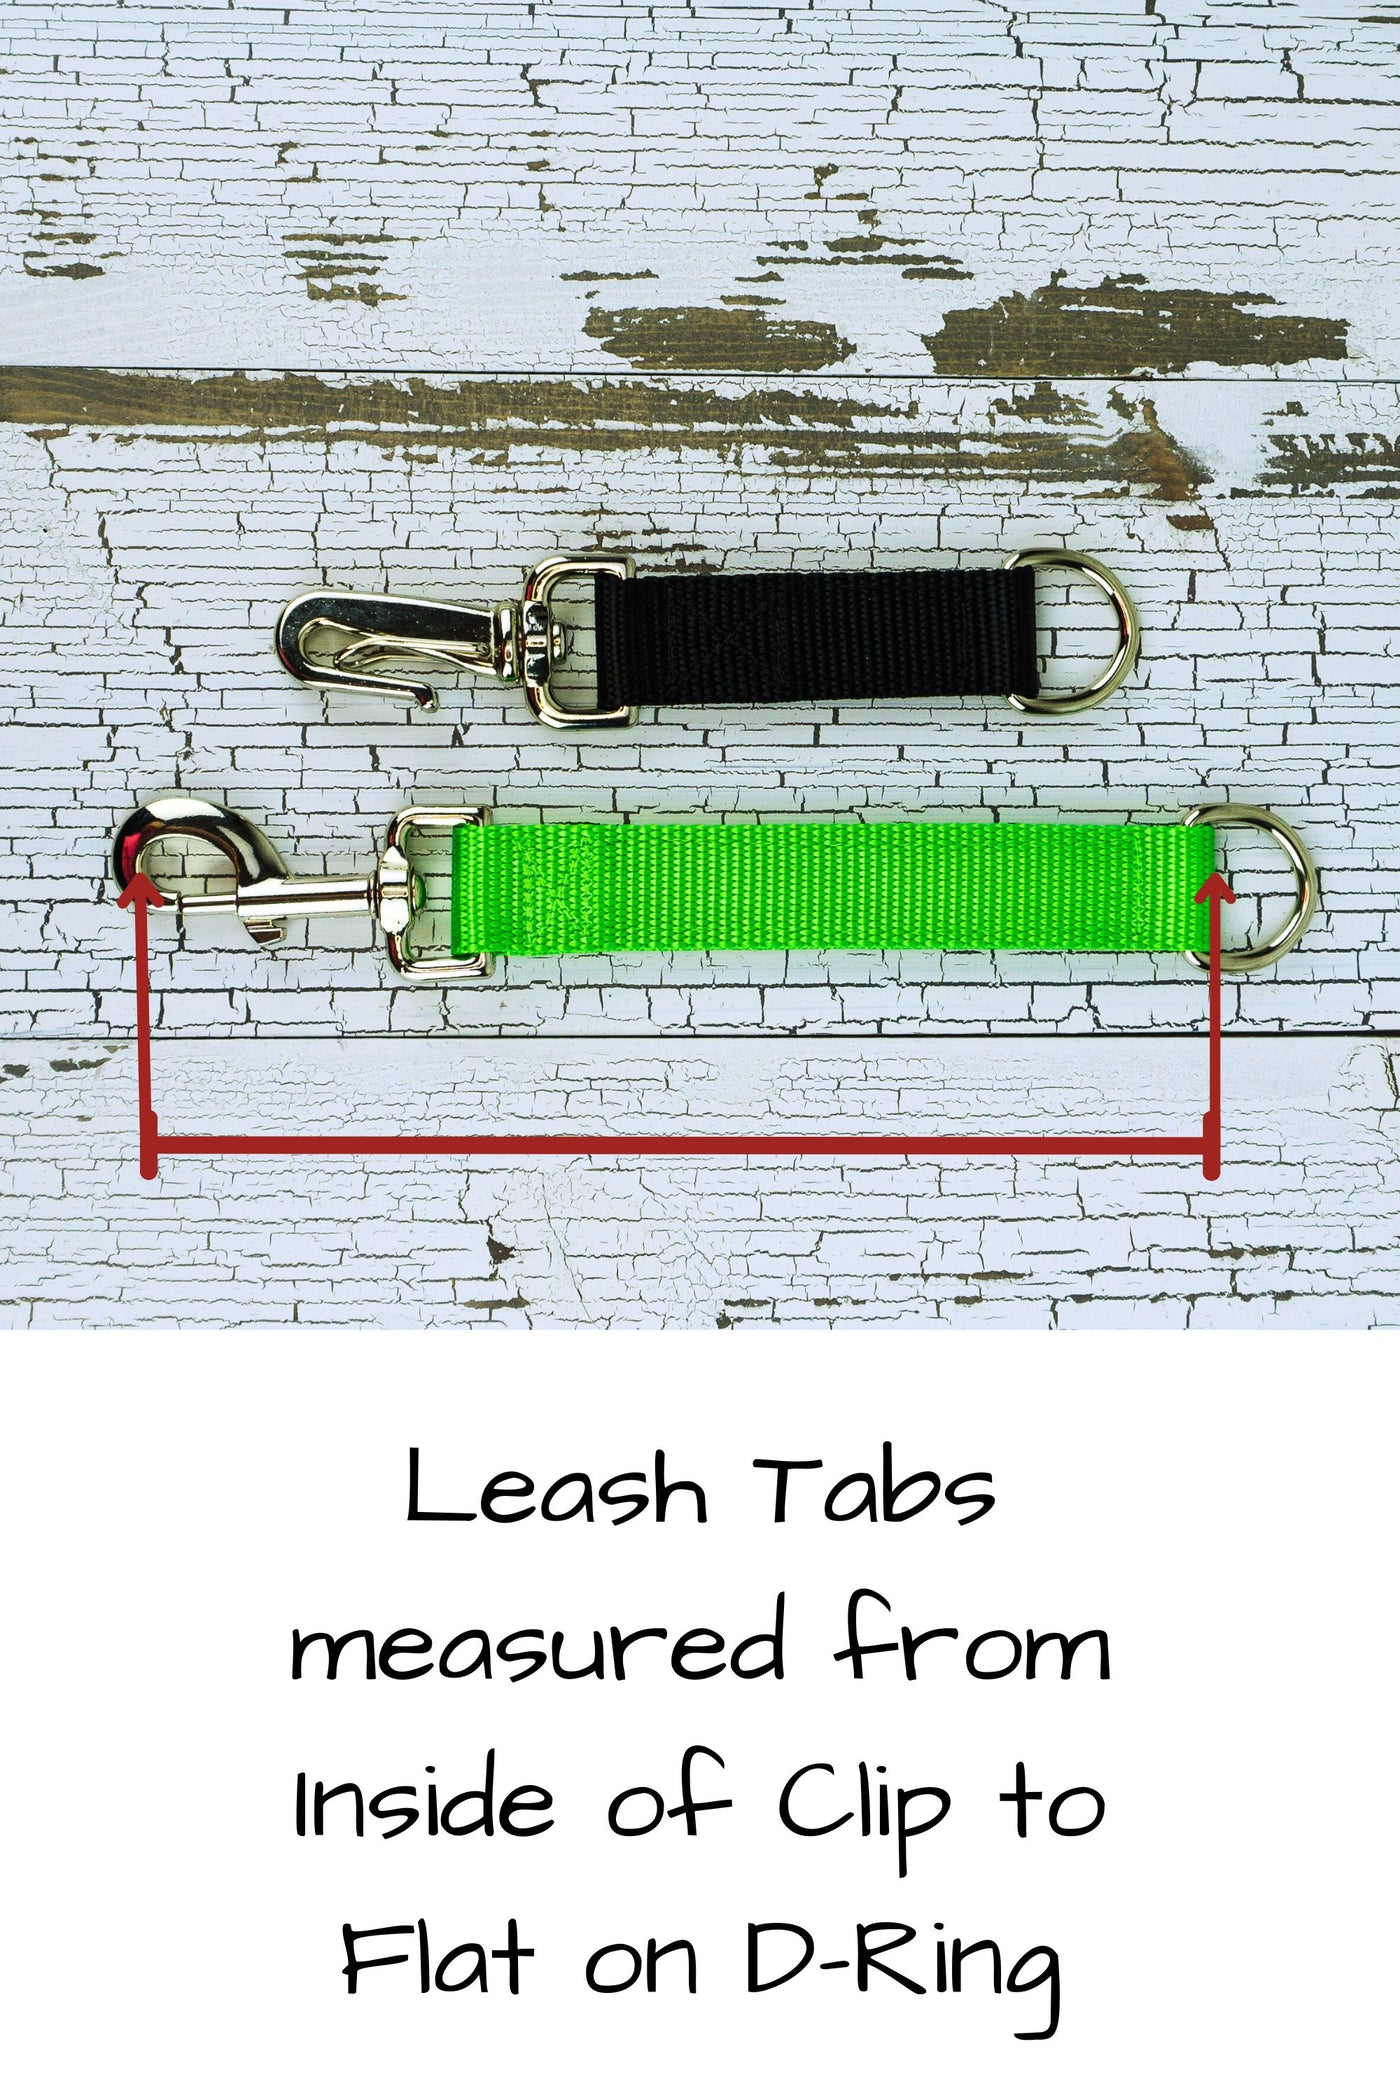 Leash tabs are measured from the inside of the clip to the flat side of the d ring on the end.